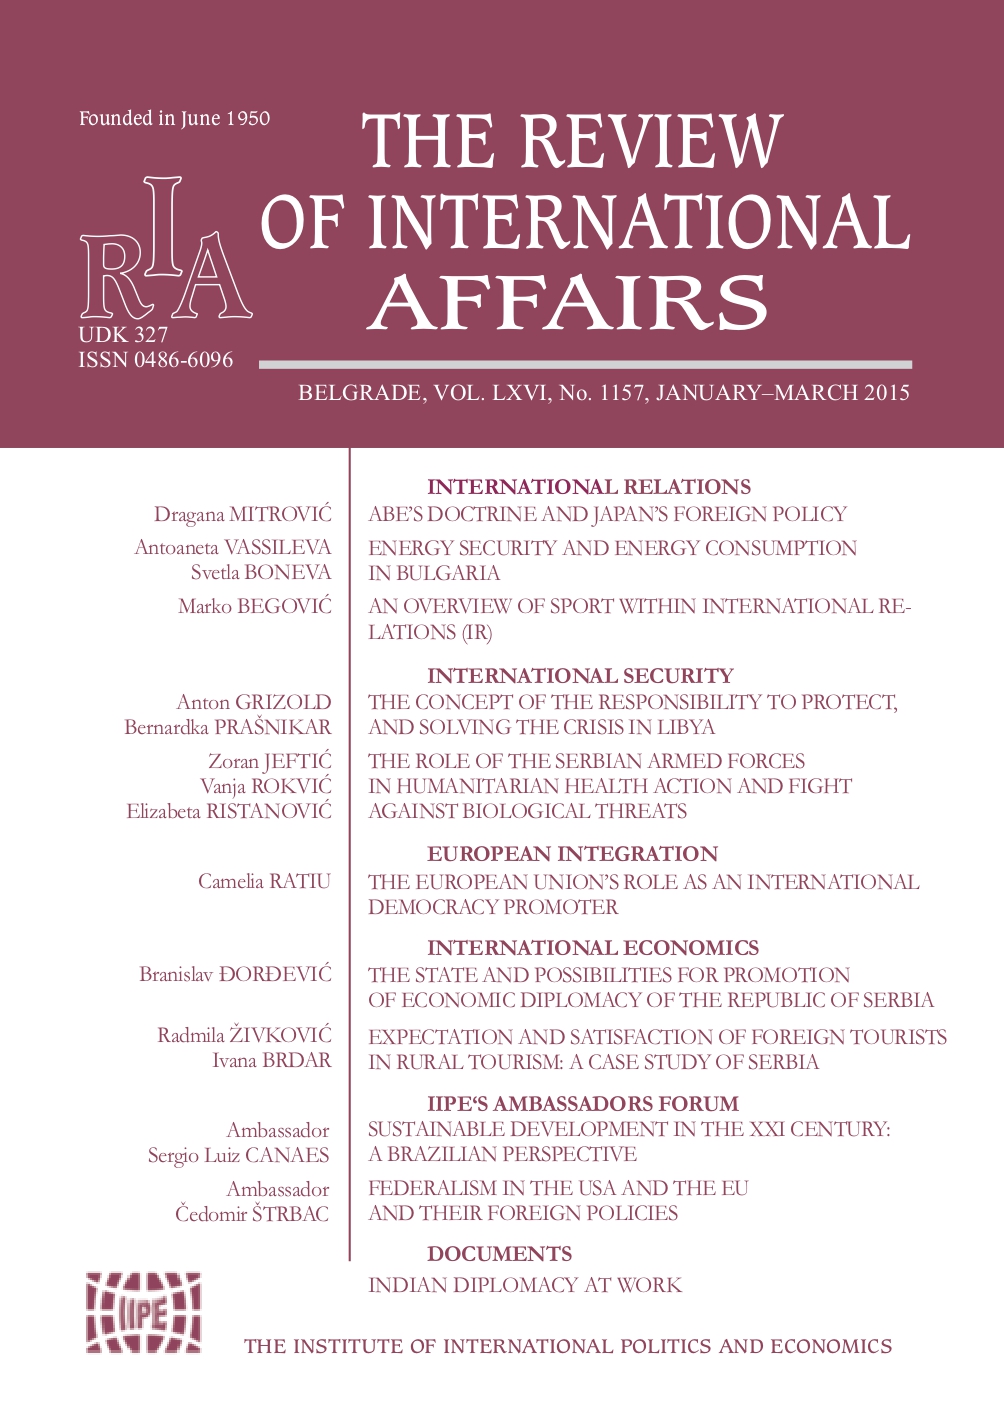 Federalism in the USA and EU and their foreign policies – The case of Kosovo’s international recognition – Cover Image